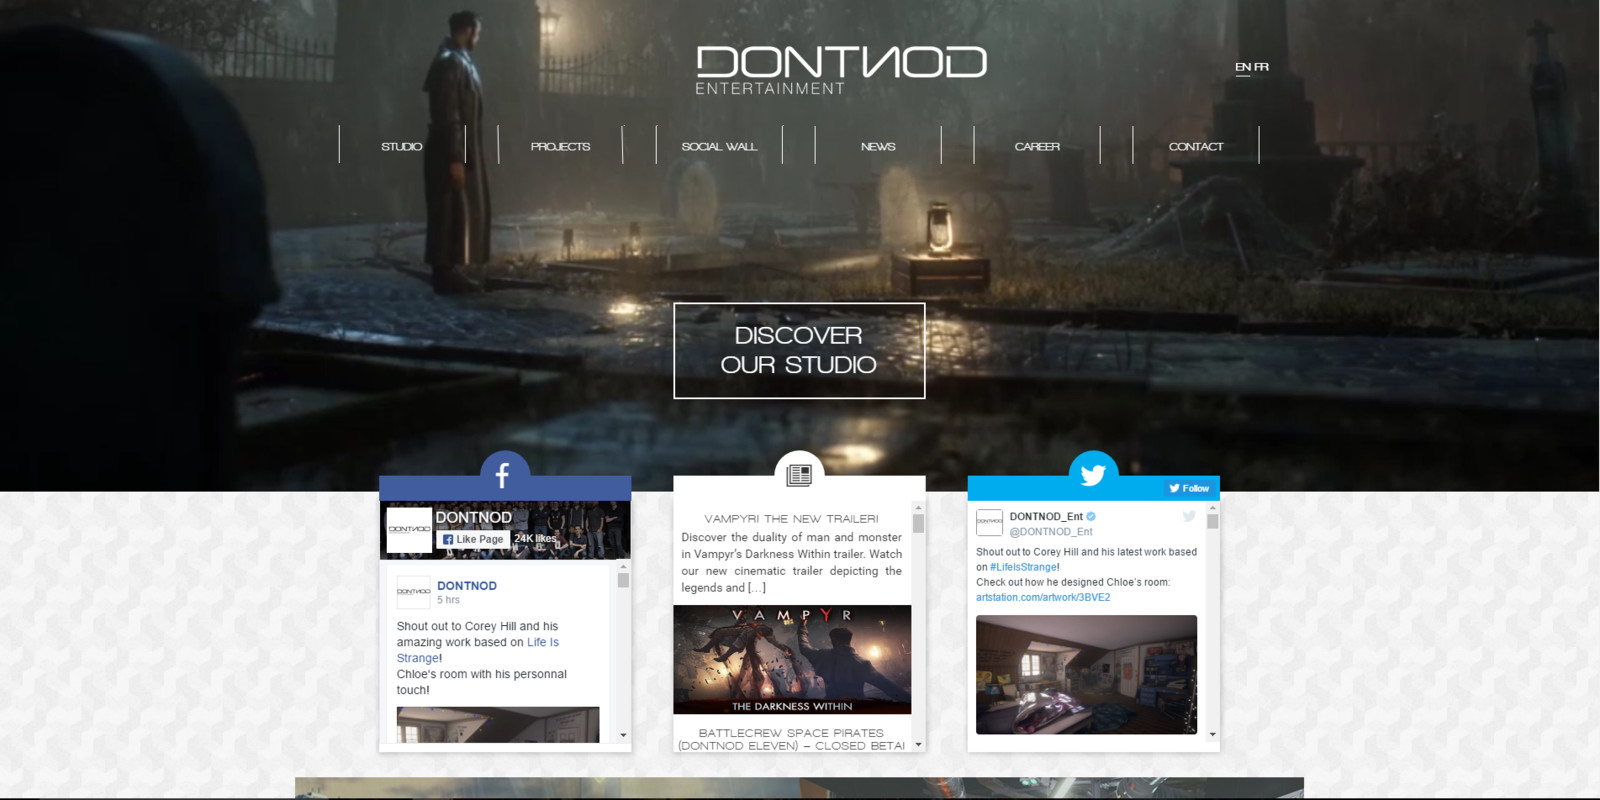 Featured on DONTNOD's Front Page with Social Media Link to Twitter. (Creators of Life is Strange.)